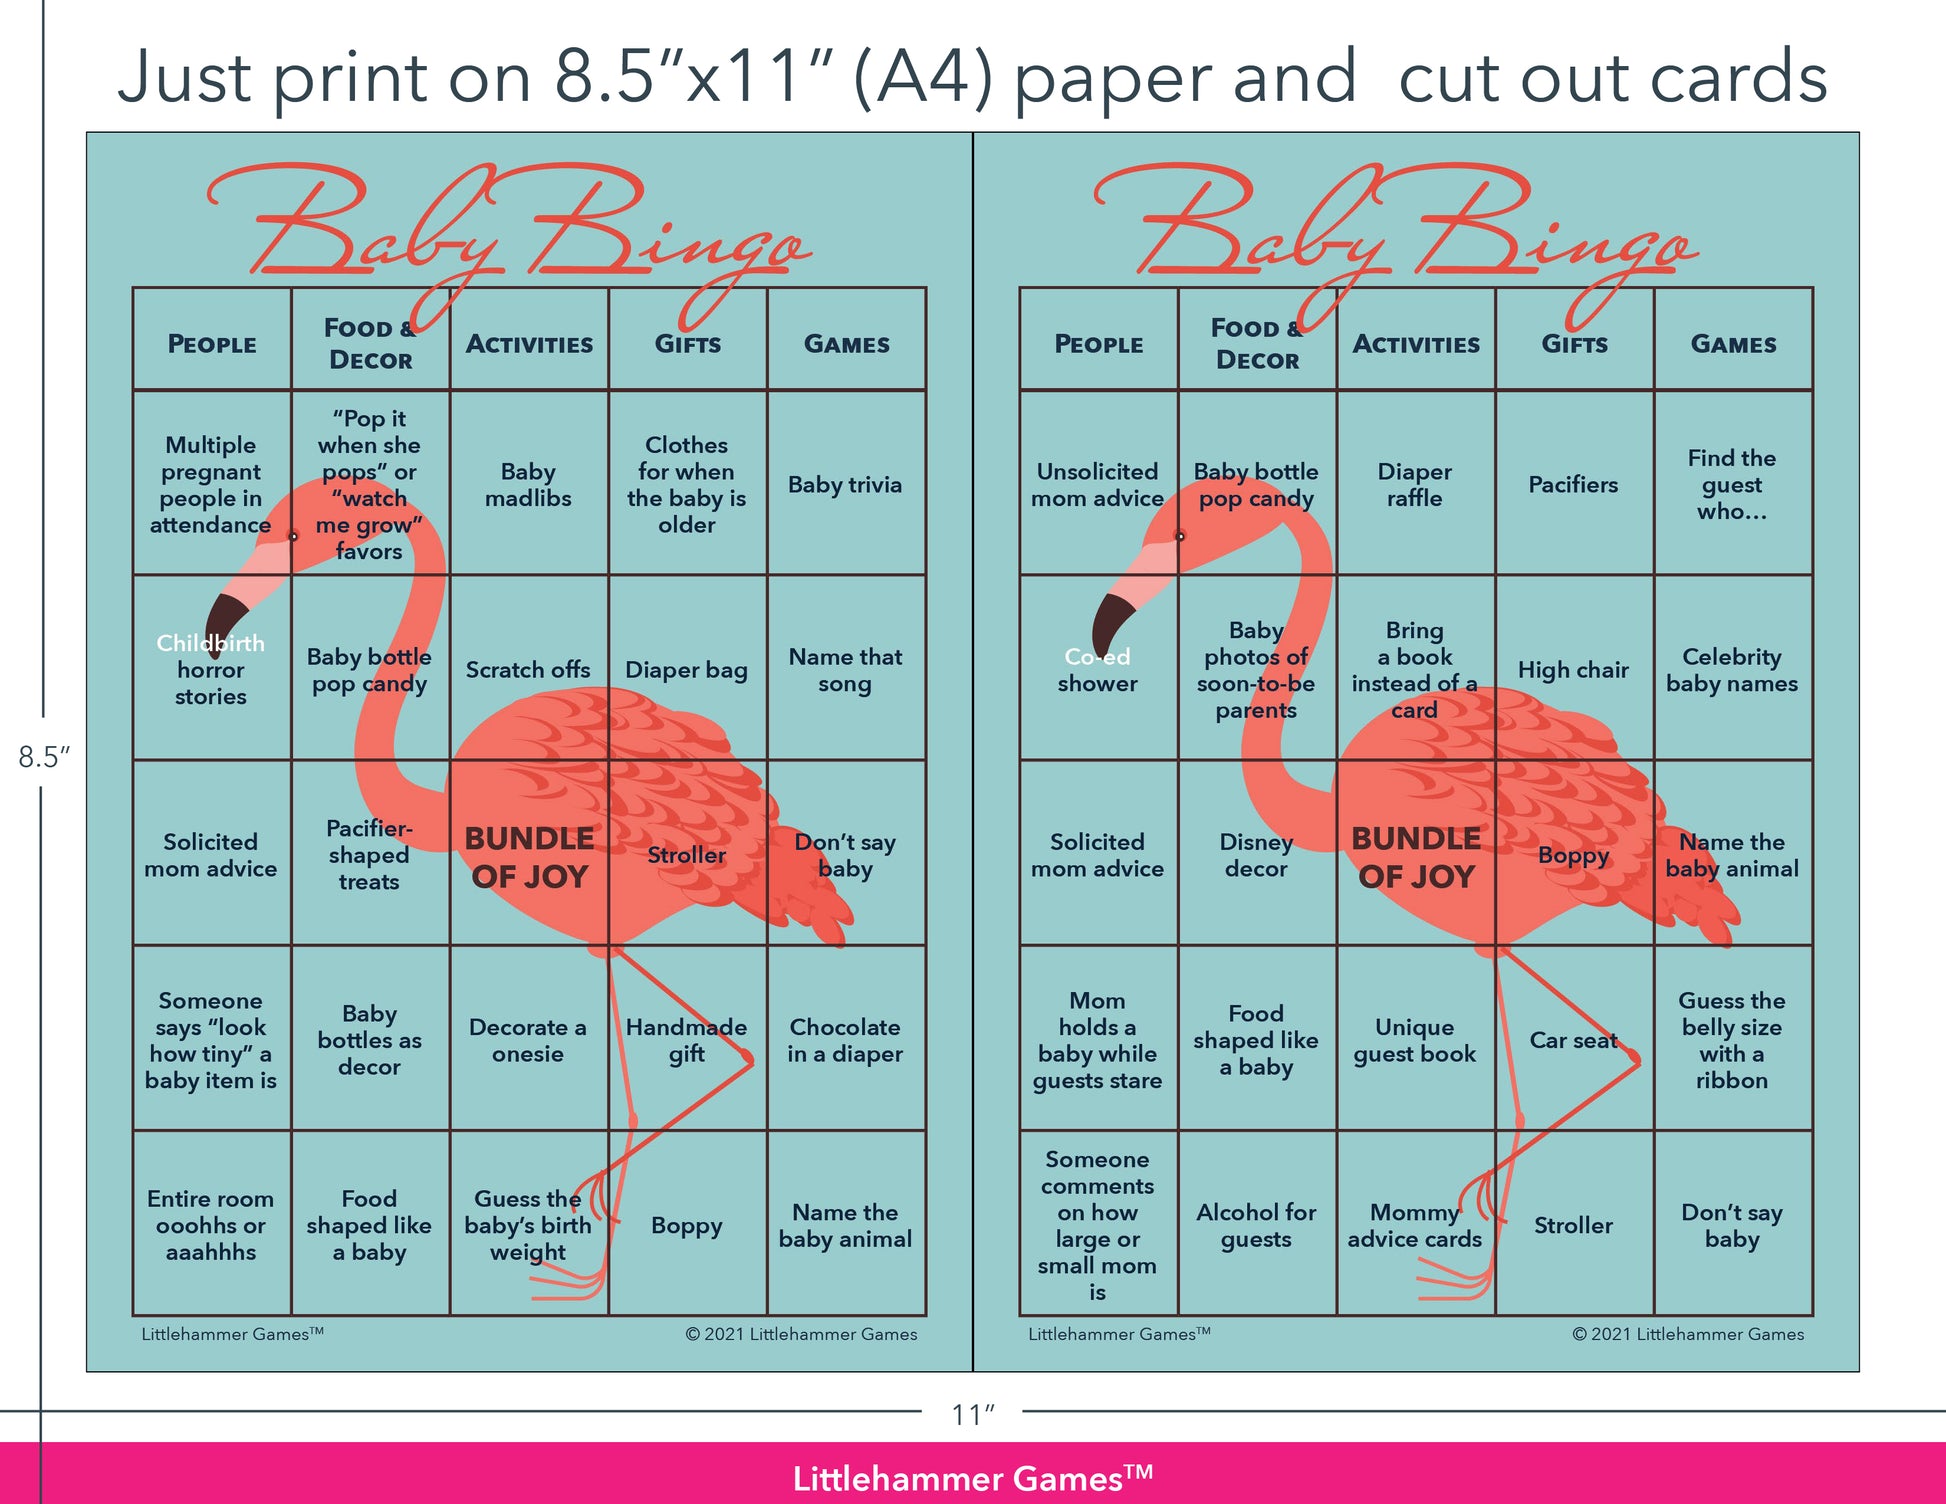 Flamingo-themed Baby Bingo game cards with printing instructions